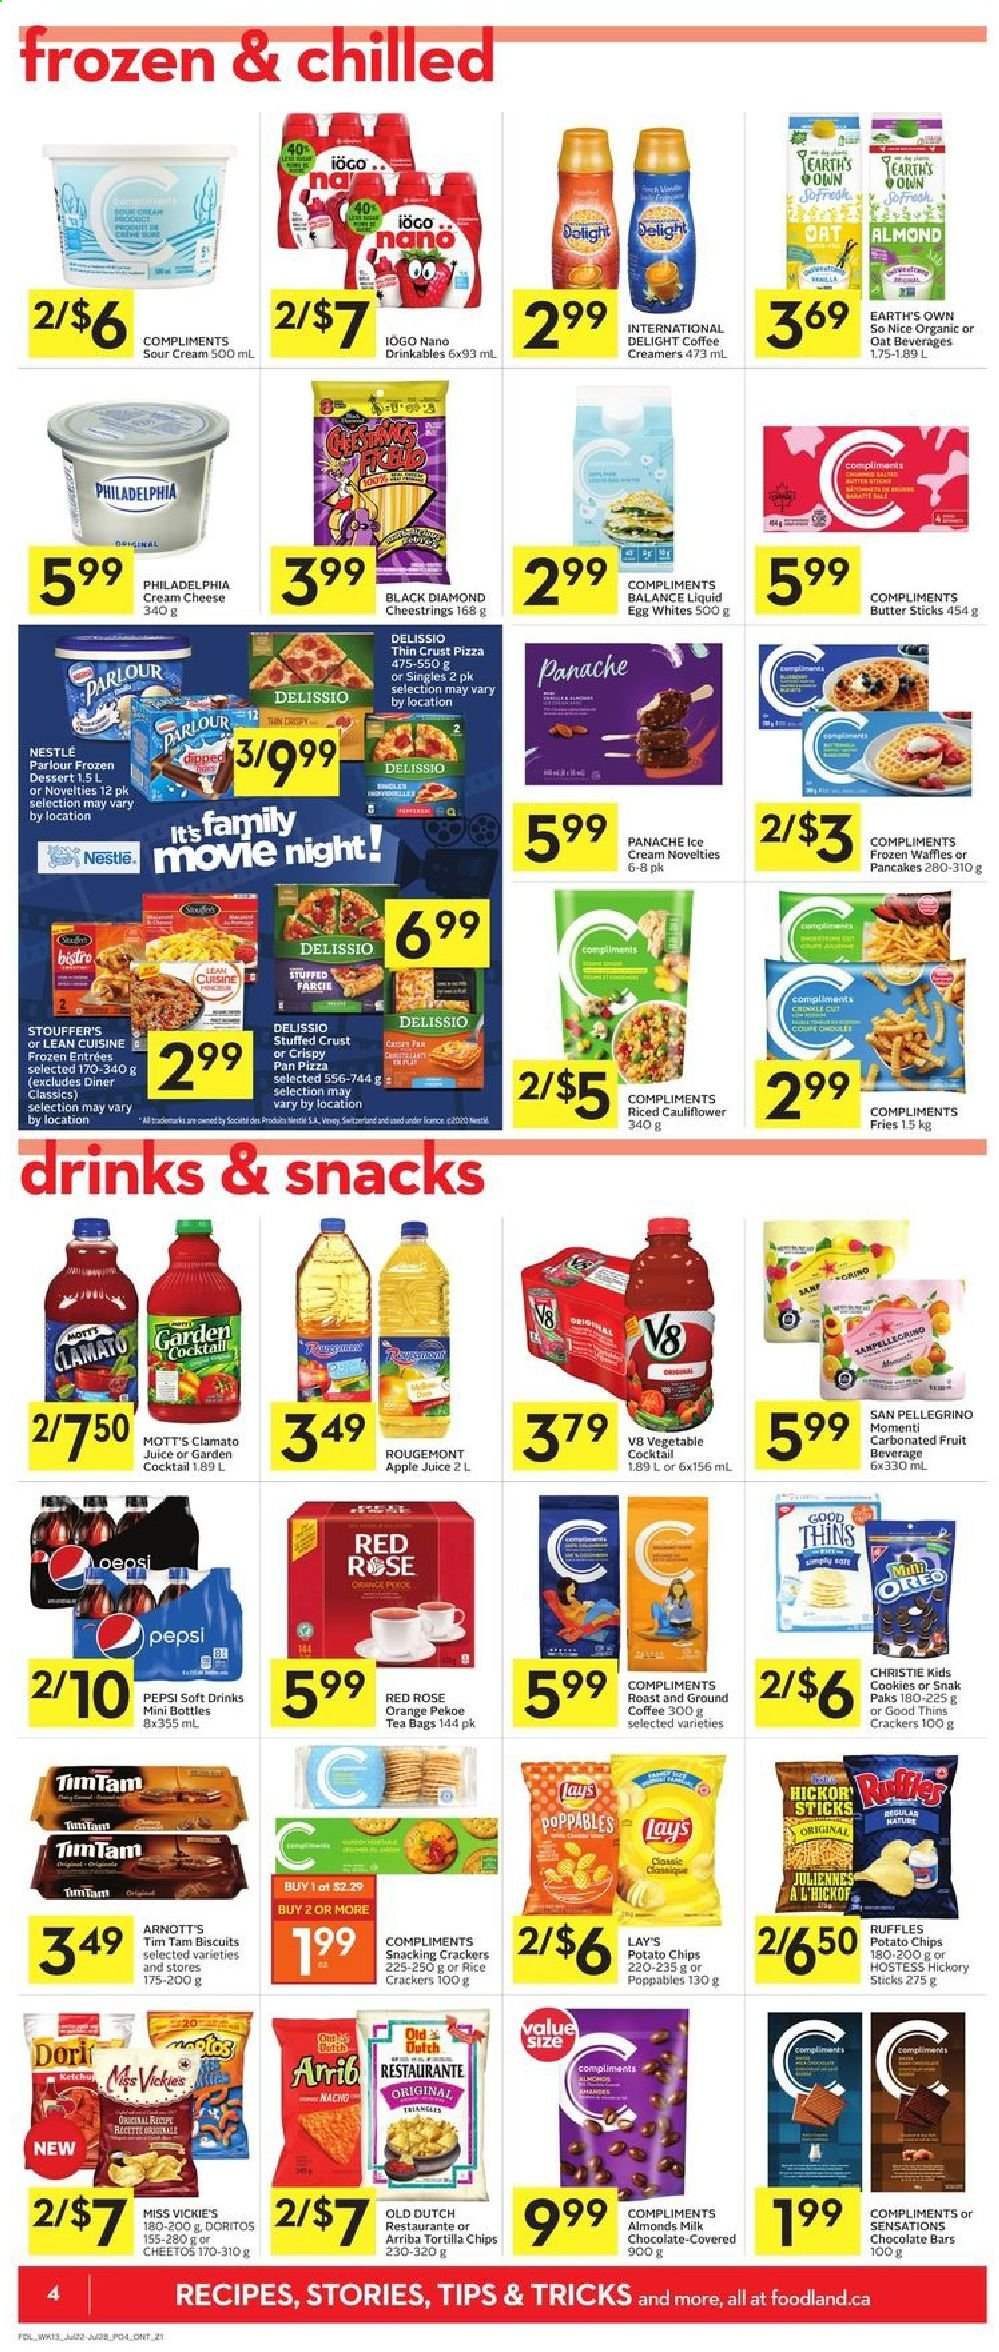 thumbnail - Foodland Flyer - July 22, 2021 - July 28, 2021 - Sales products - waffles, Mott's, pizza, Lean Cuisine, string cheese, Oreo, eggs, butter, sour cream, ice cream, Stouffer's, potato fries, cookies, milk chocolate, crackers, Tim Tam, biscuit, chocolate bar, Doritos, tortilla chips, potato chips, Cheetos, Lay’s, Thins, rice crackers, Ruffles, almonds, apple juice, Pepsi, juice, Clamato, soft drink, San Pellegrino, tea bags, coffee, ground coffee, wine, So Nice, rosé wine, Nestlé. Page 4.